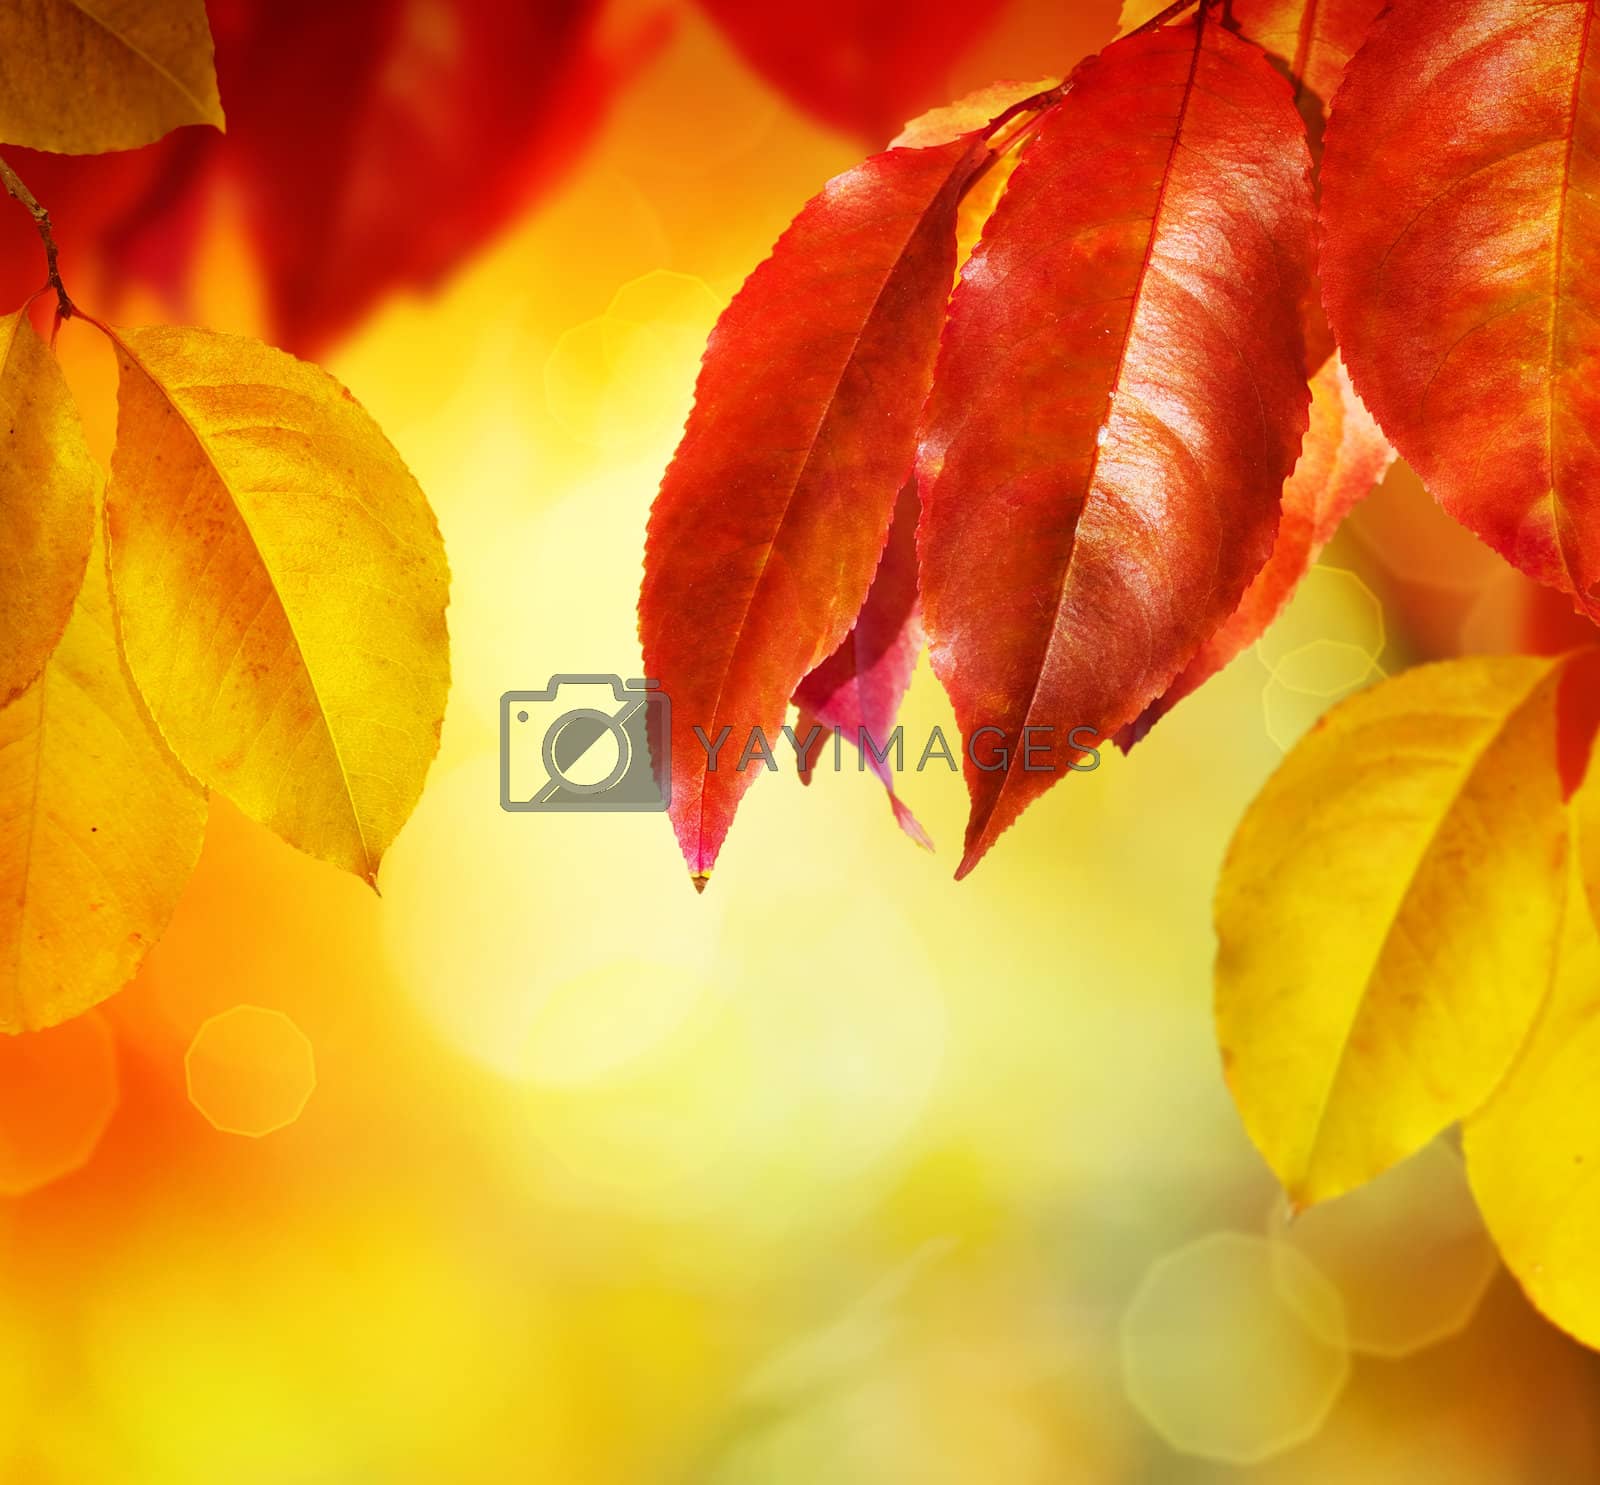 Royalty free image of Fall.Autumn leaves by SubbotinaA